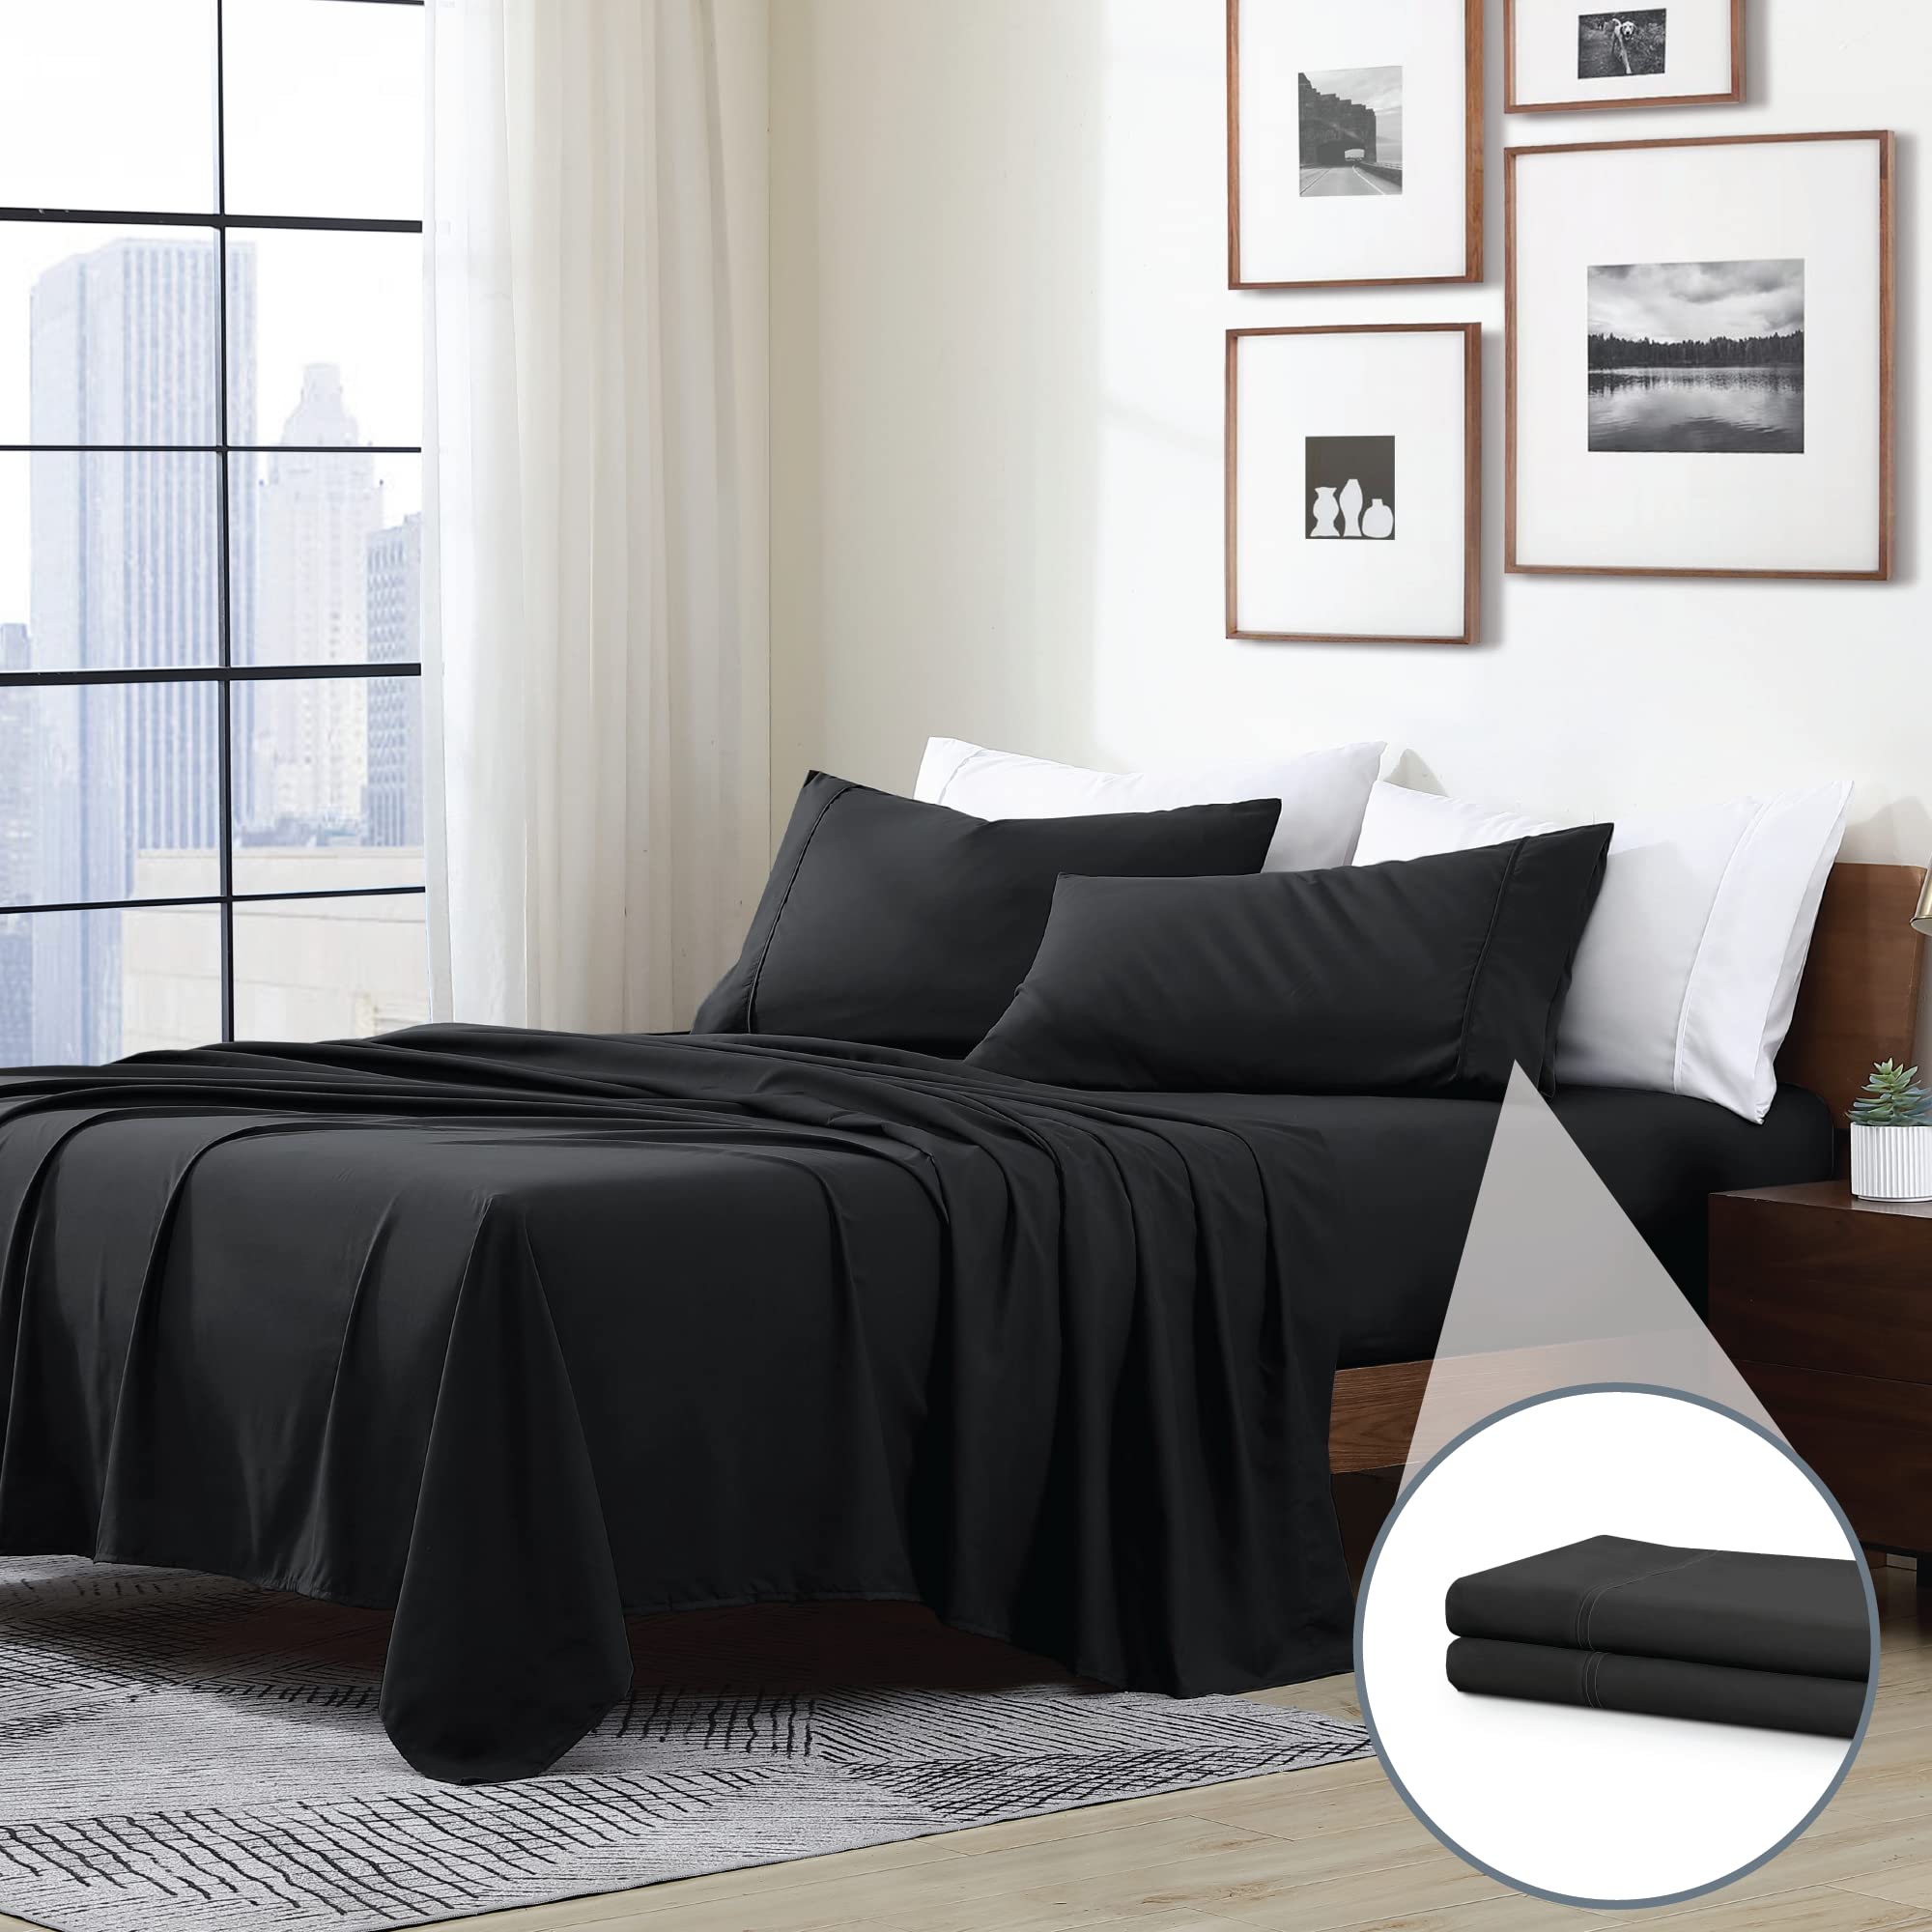 Book Cover Swift Home Luxury Bedding Collection, Ultra-Soft Brushed Microfiber 4-Piece Bed Sheet Sets, Extremely Durable - Easy Fit - Wrinkle Resistant - (Includes 2 Bonus Pillowcases), Twin, Black